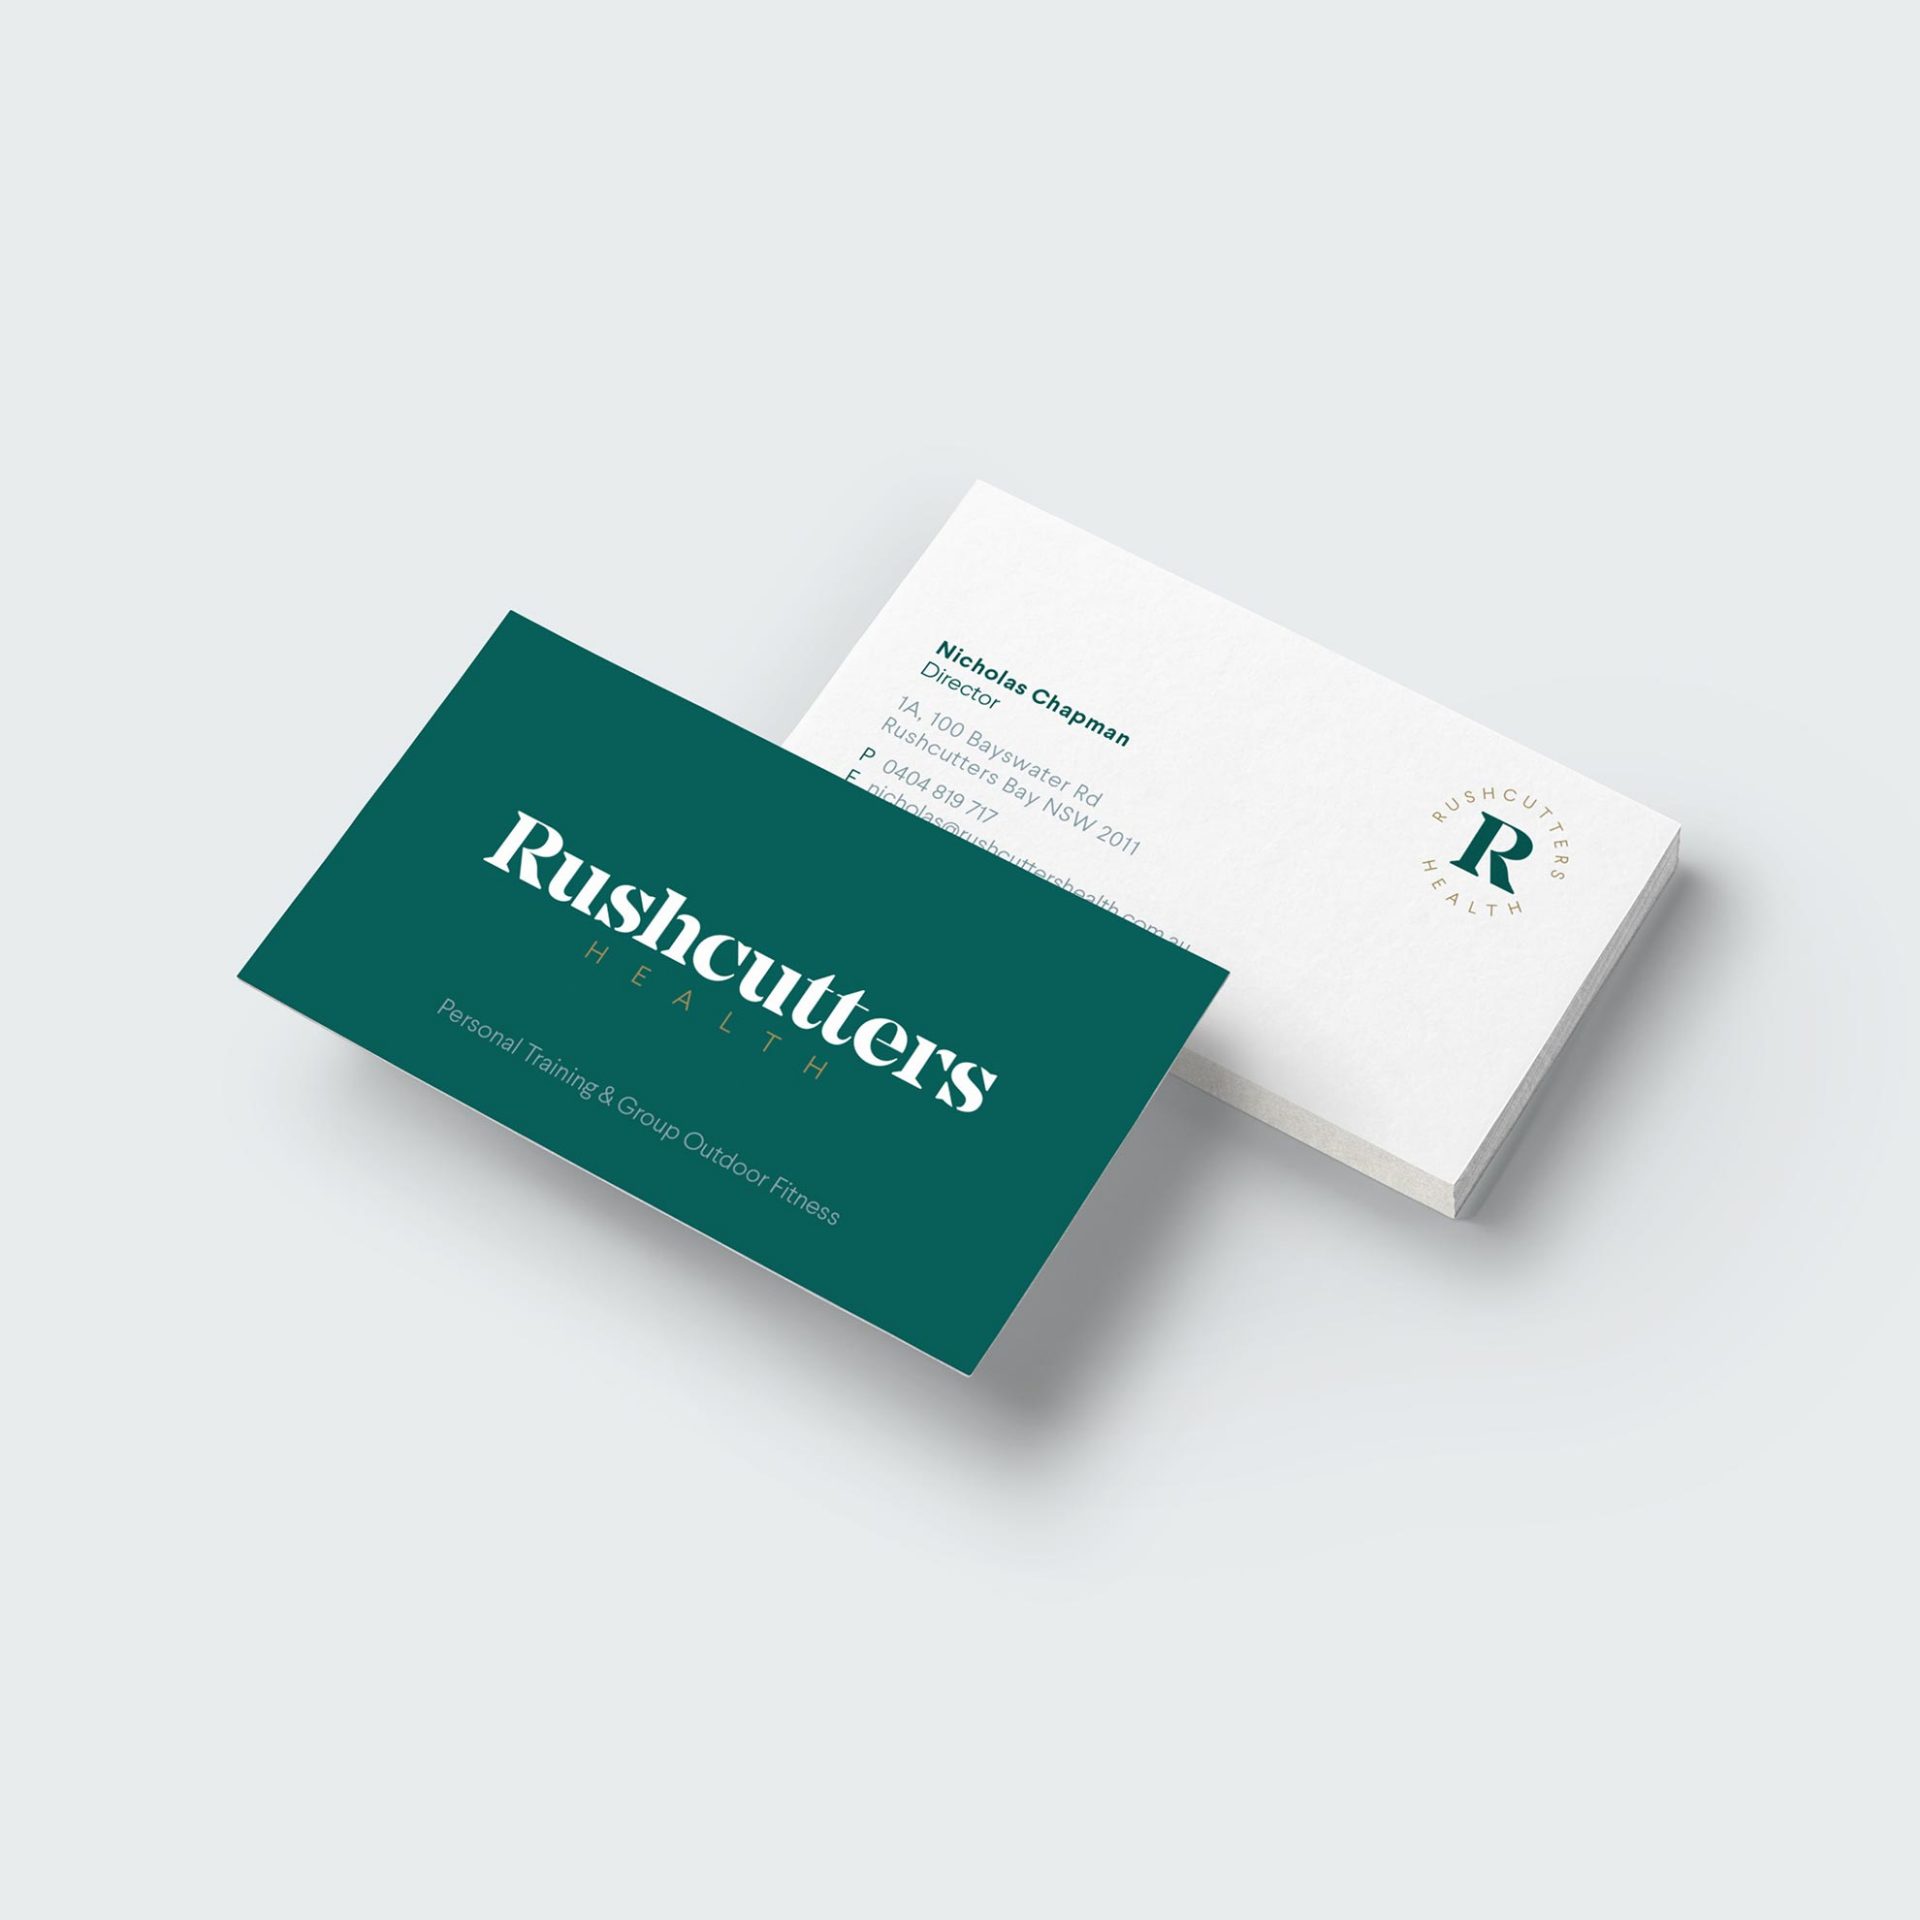 Rushcutters Health Business Cards